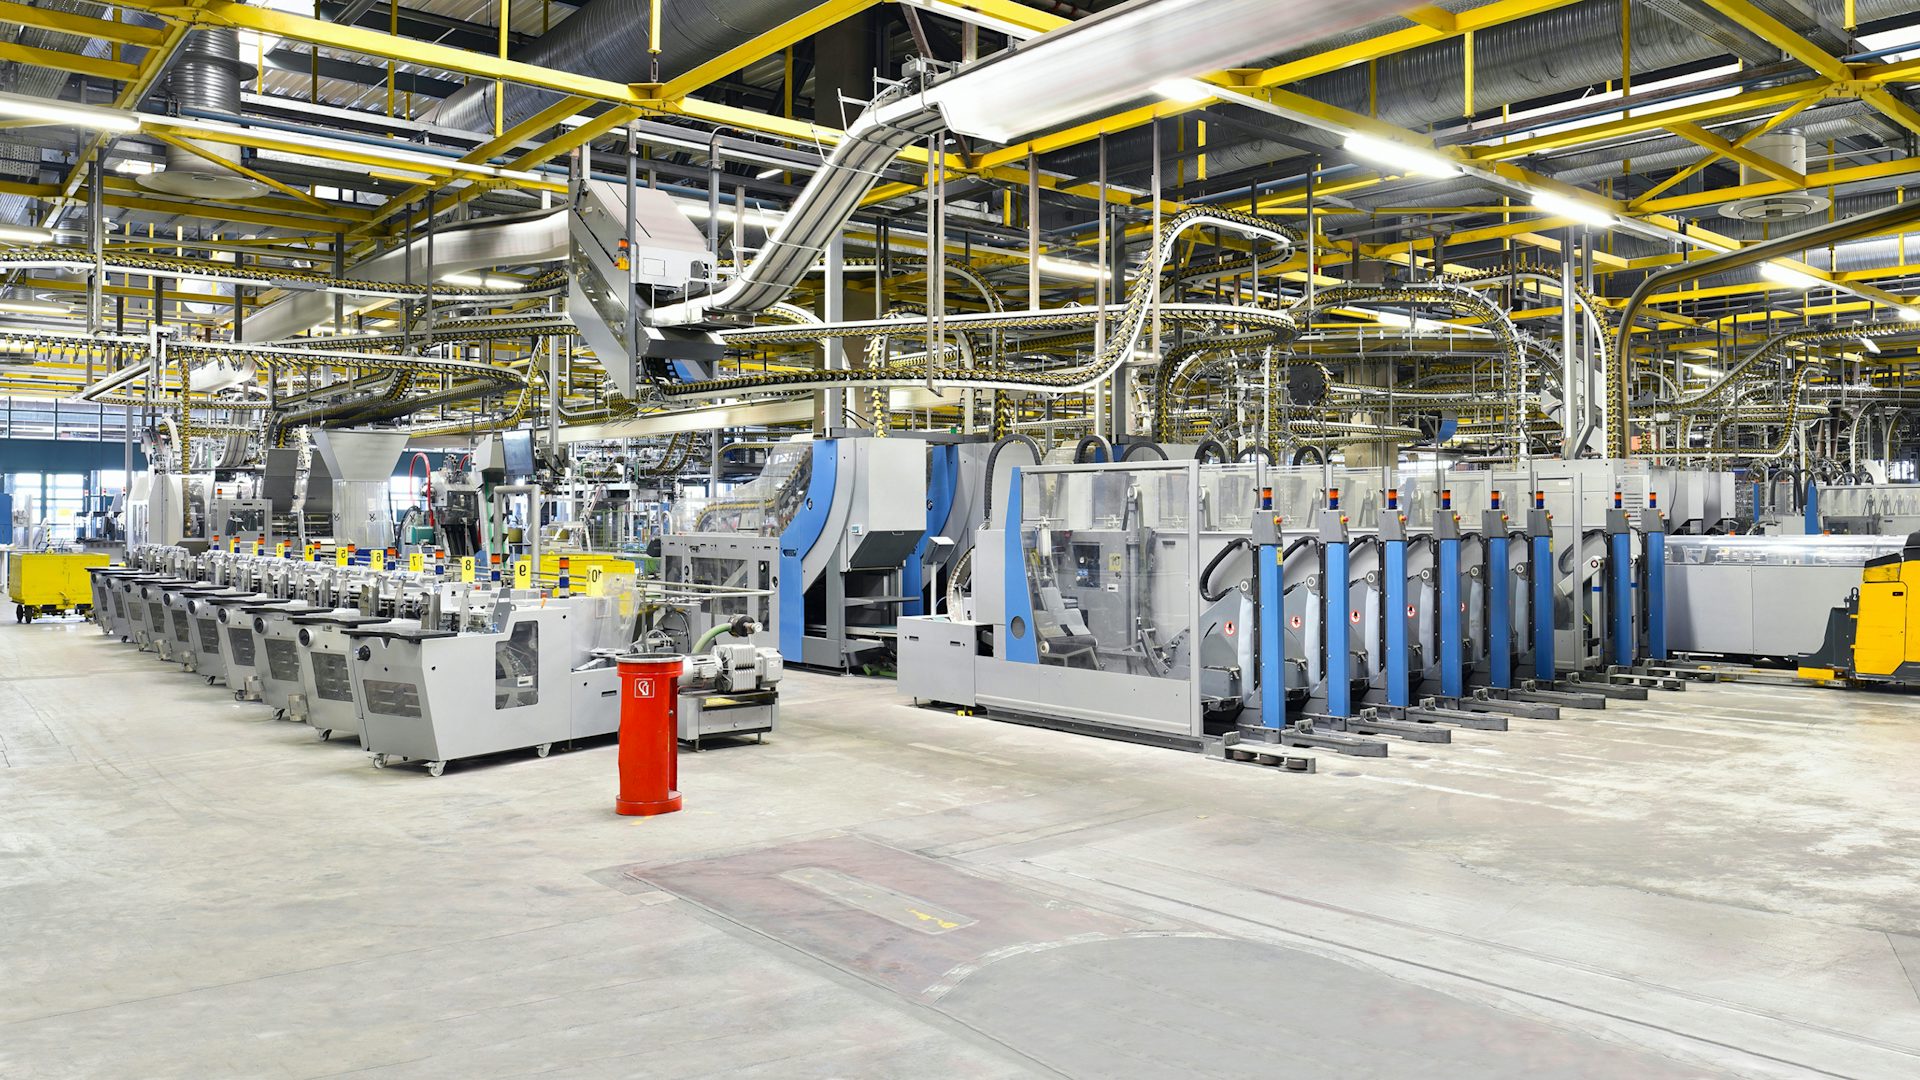 Panoramic view of a factory assembly line.